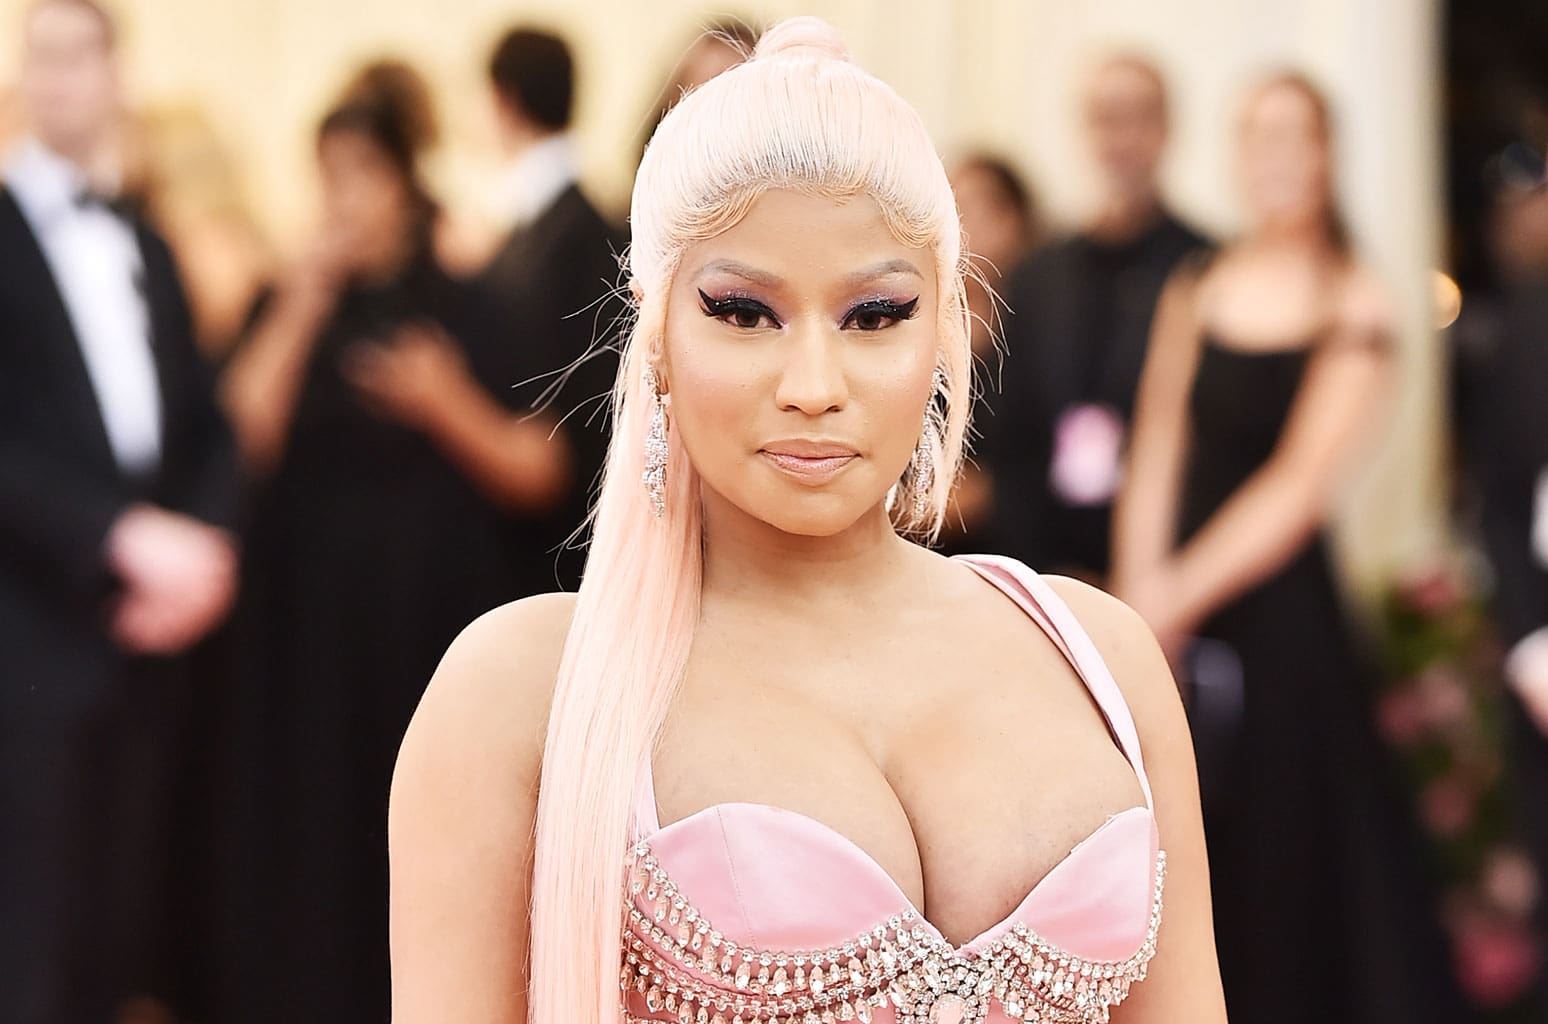 Nicki Minaj Shares A Drop-Dead Gorgeous Look On Social Media And Fans Are Here For It